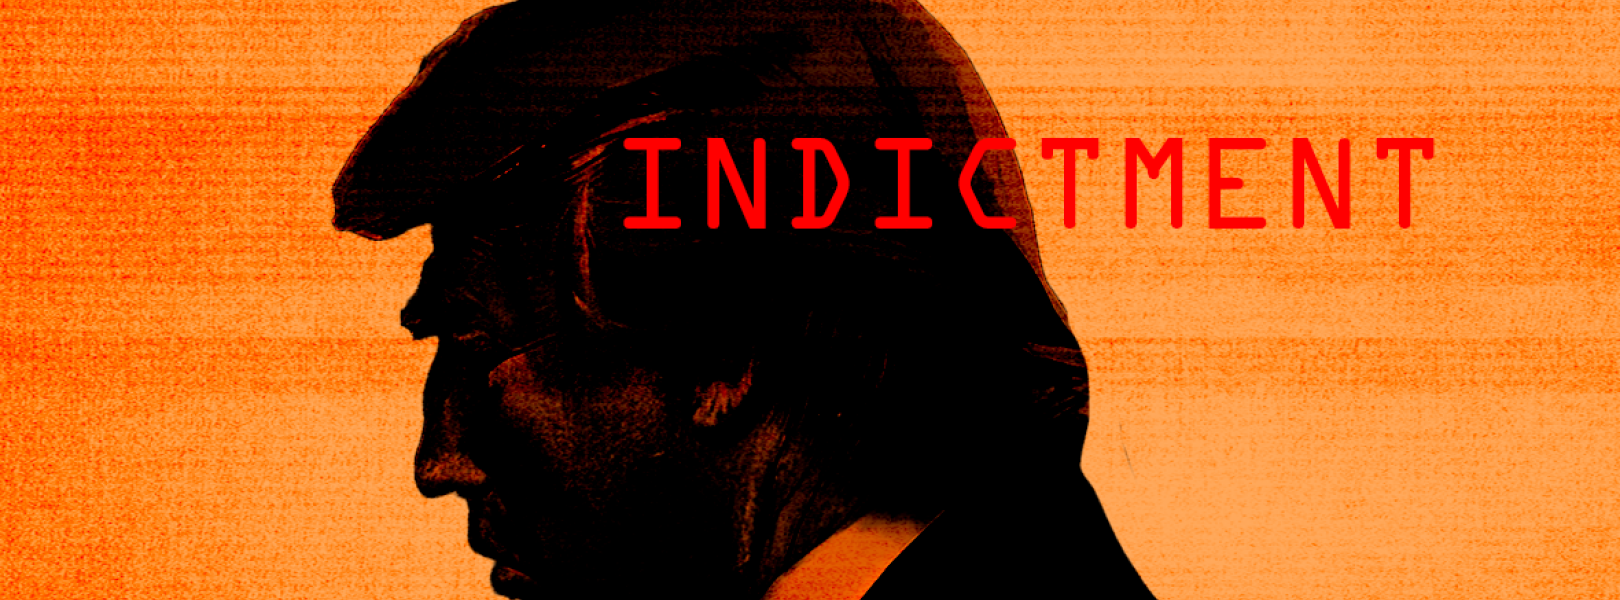 Outline of Trump's profile against an orange background with the word "indictment"